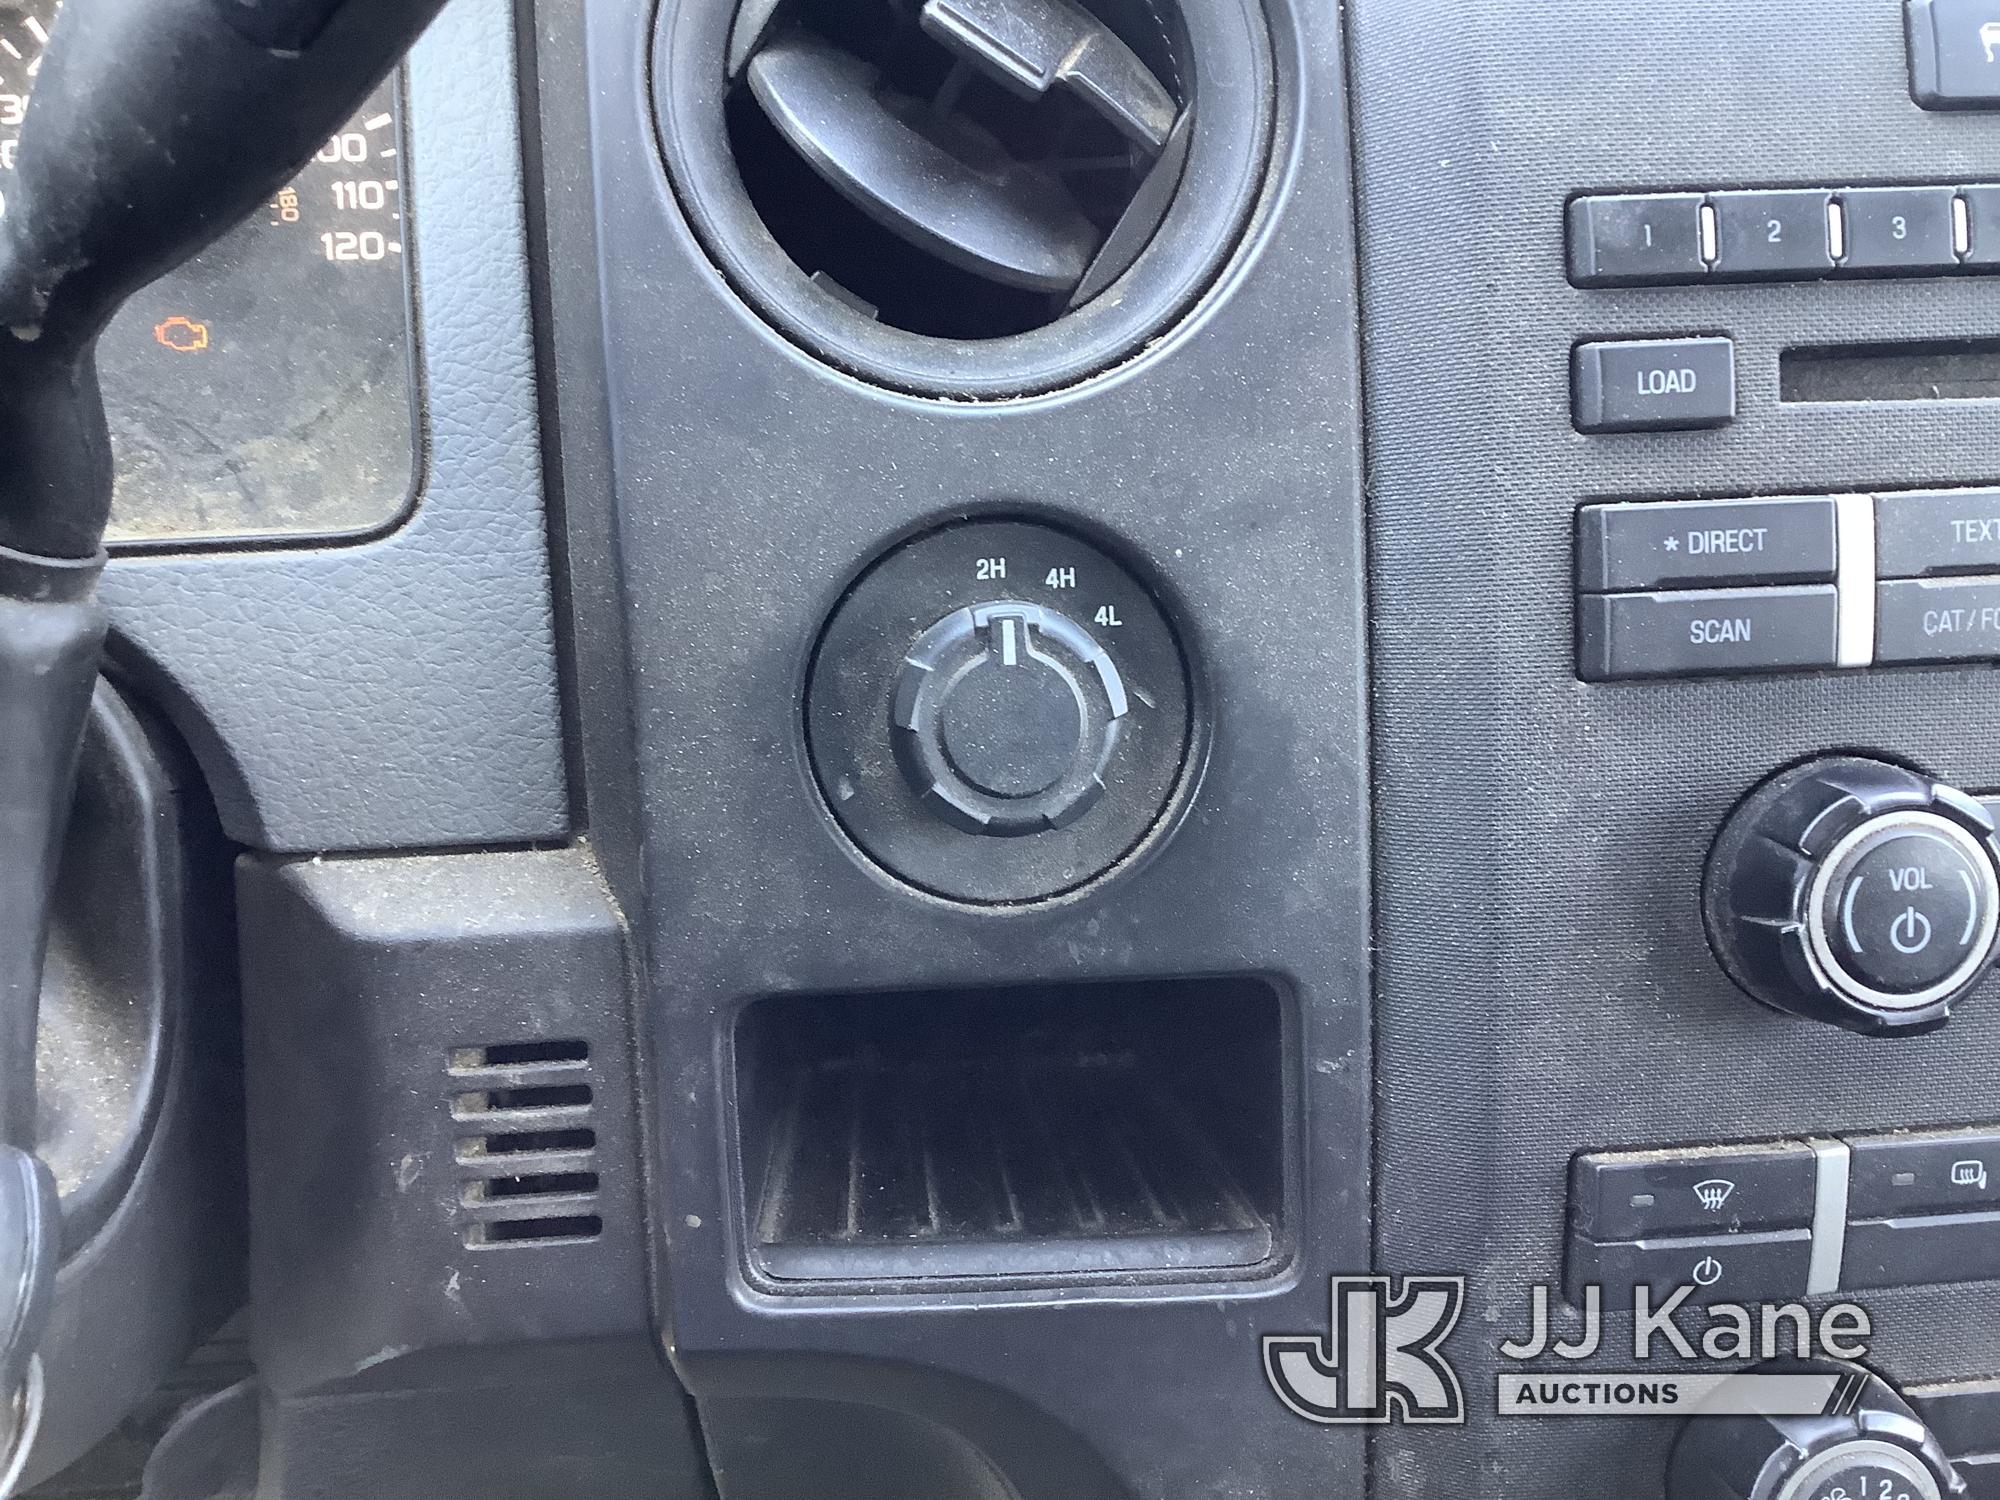 (Smock, PA) 2013 Ford F150 4x4 Extended-Cab Pickup Truck Runs Rough & Moves, Check Engine Light On,